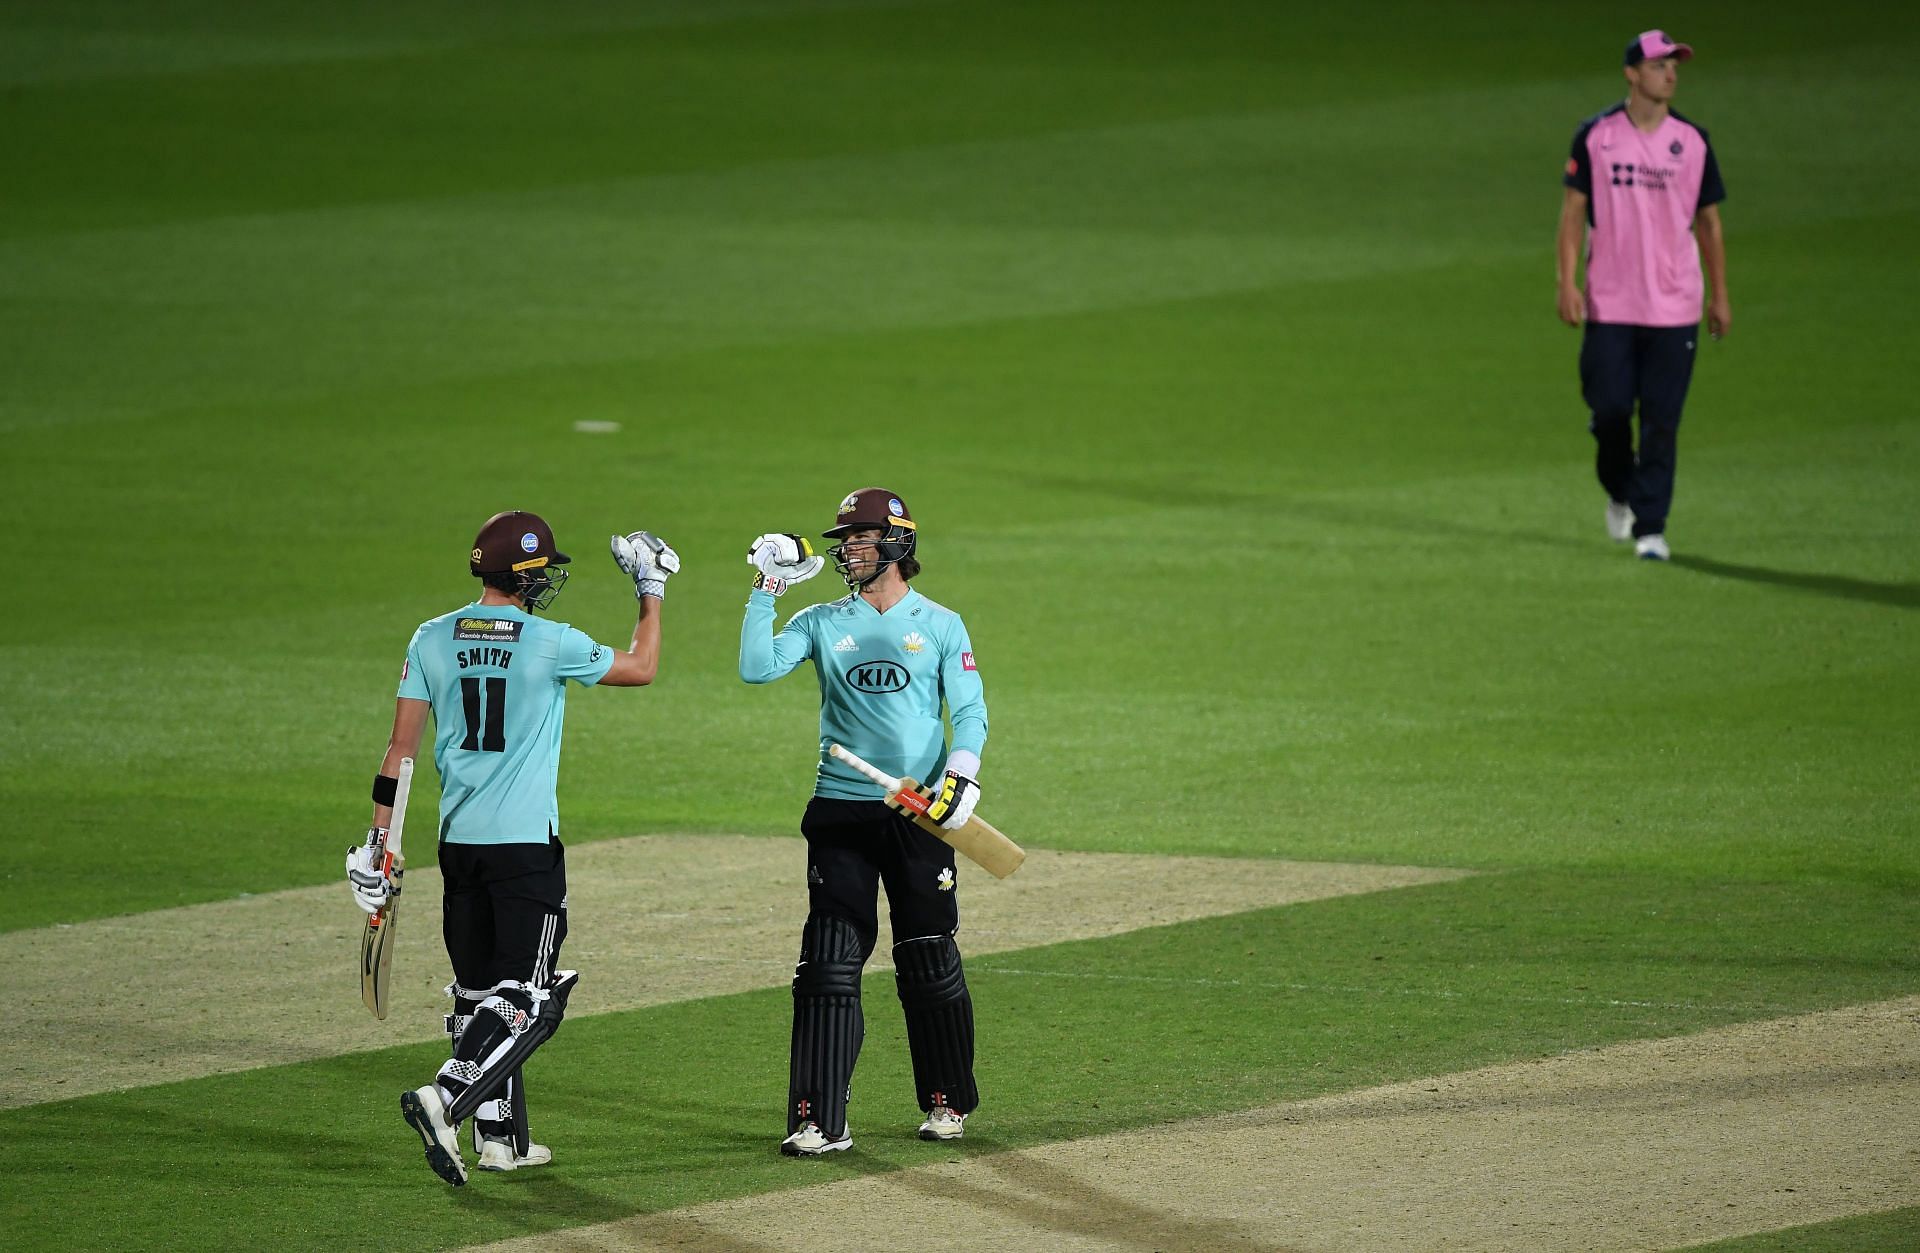 Surrey v Middlesex - T20 Vitality Blast 2020 (Image courtesy: Getty Images)